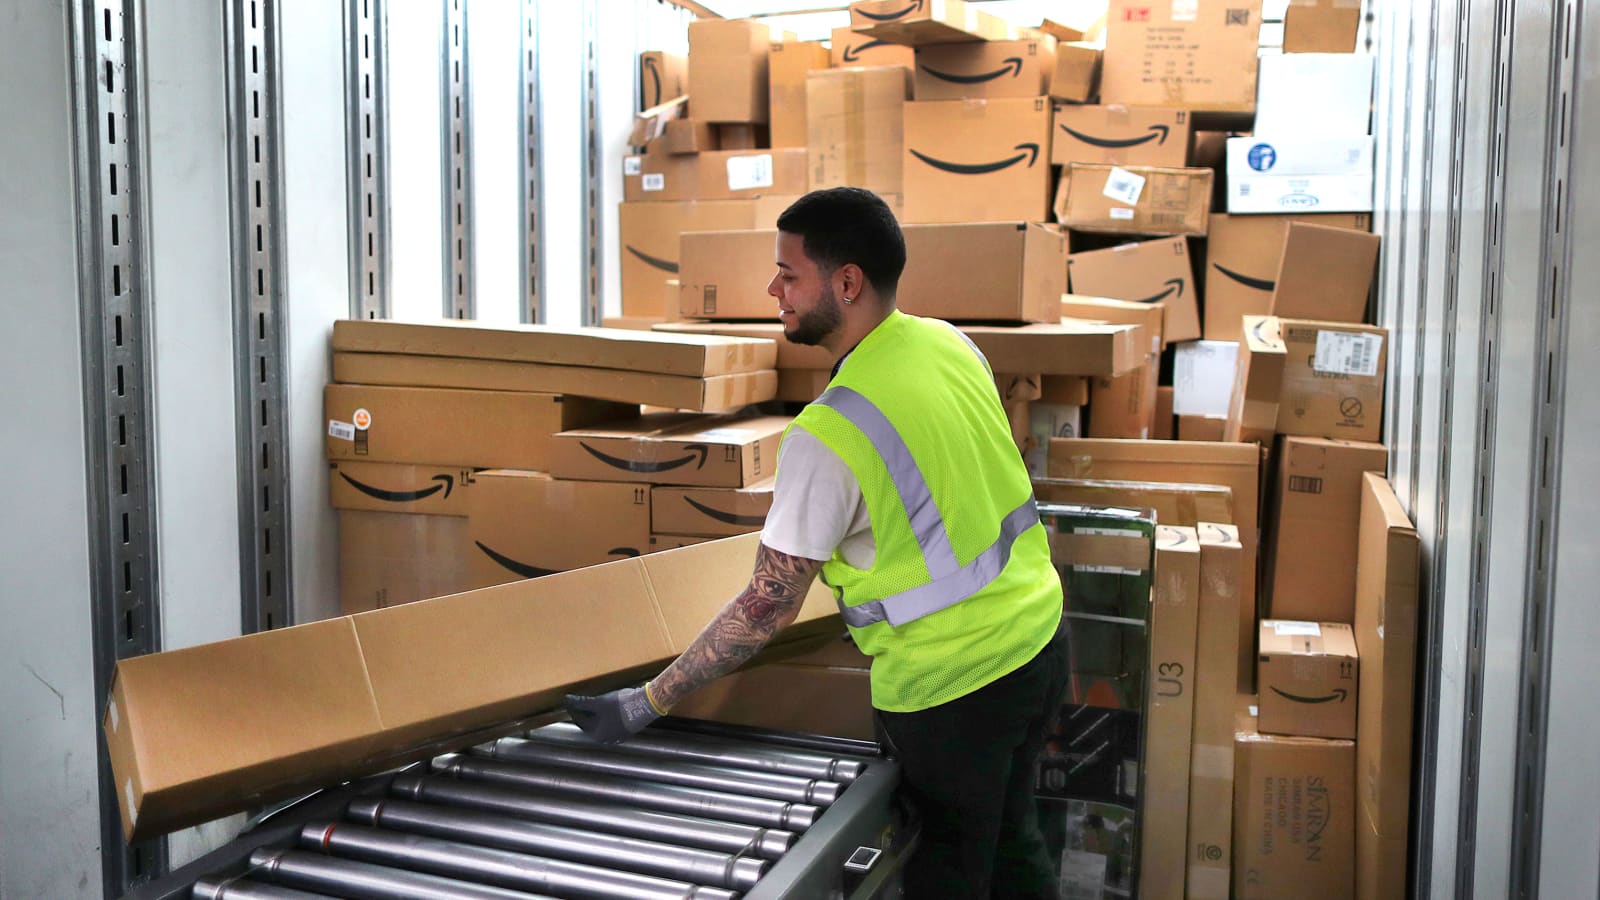 Amazon Extends Wage Increases For Warehouse Workers